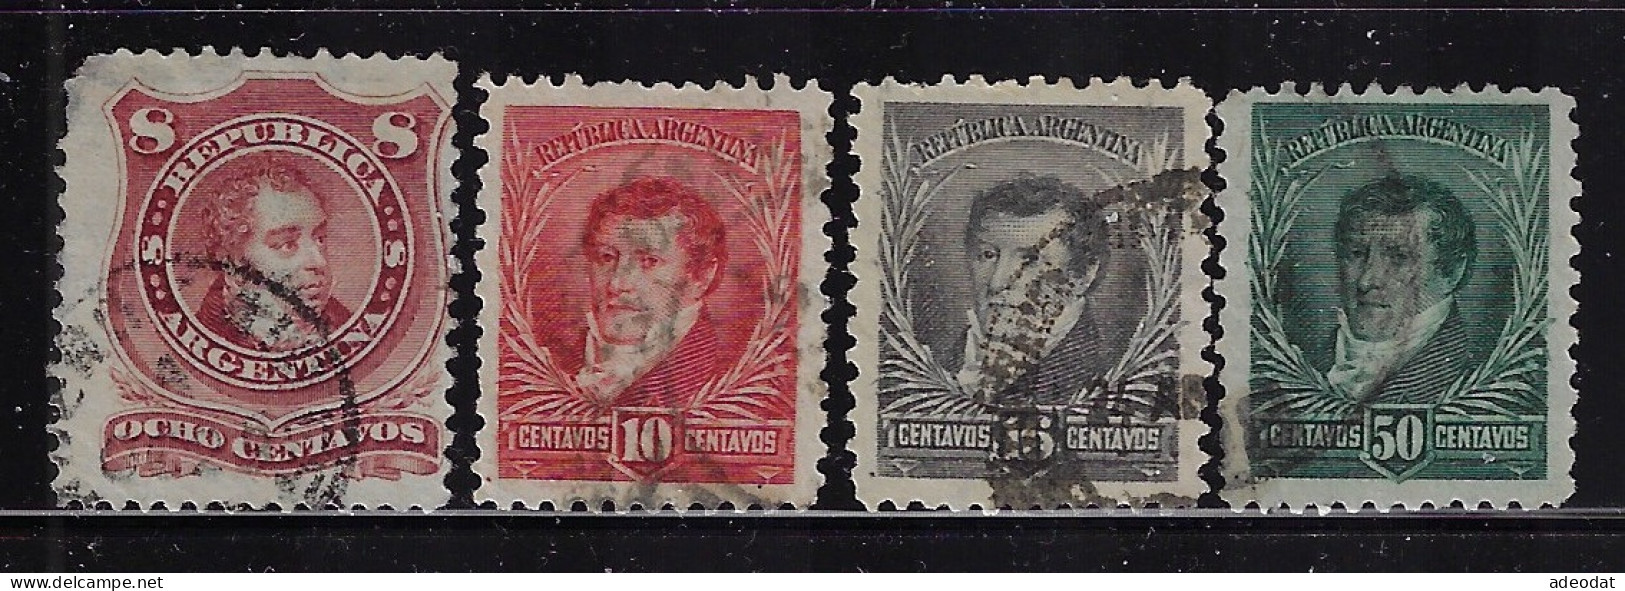 ARGENTINA 1877-1892  SCOTT #39a,98,100,102 USED - Used Stamps